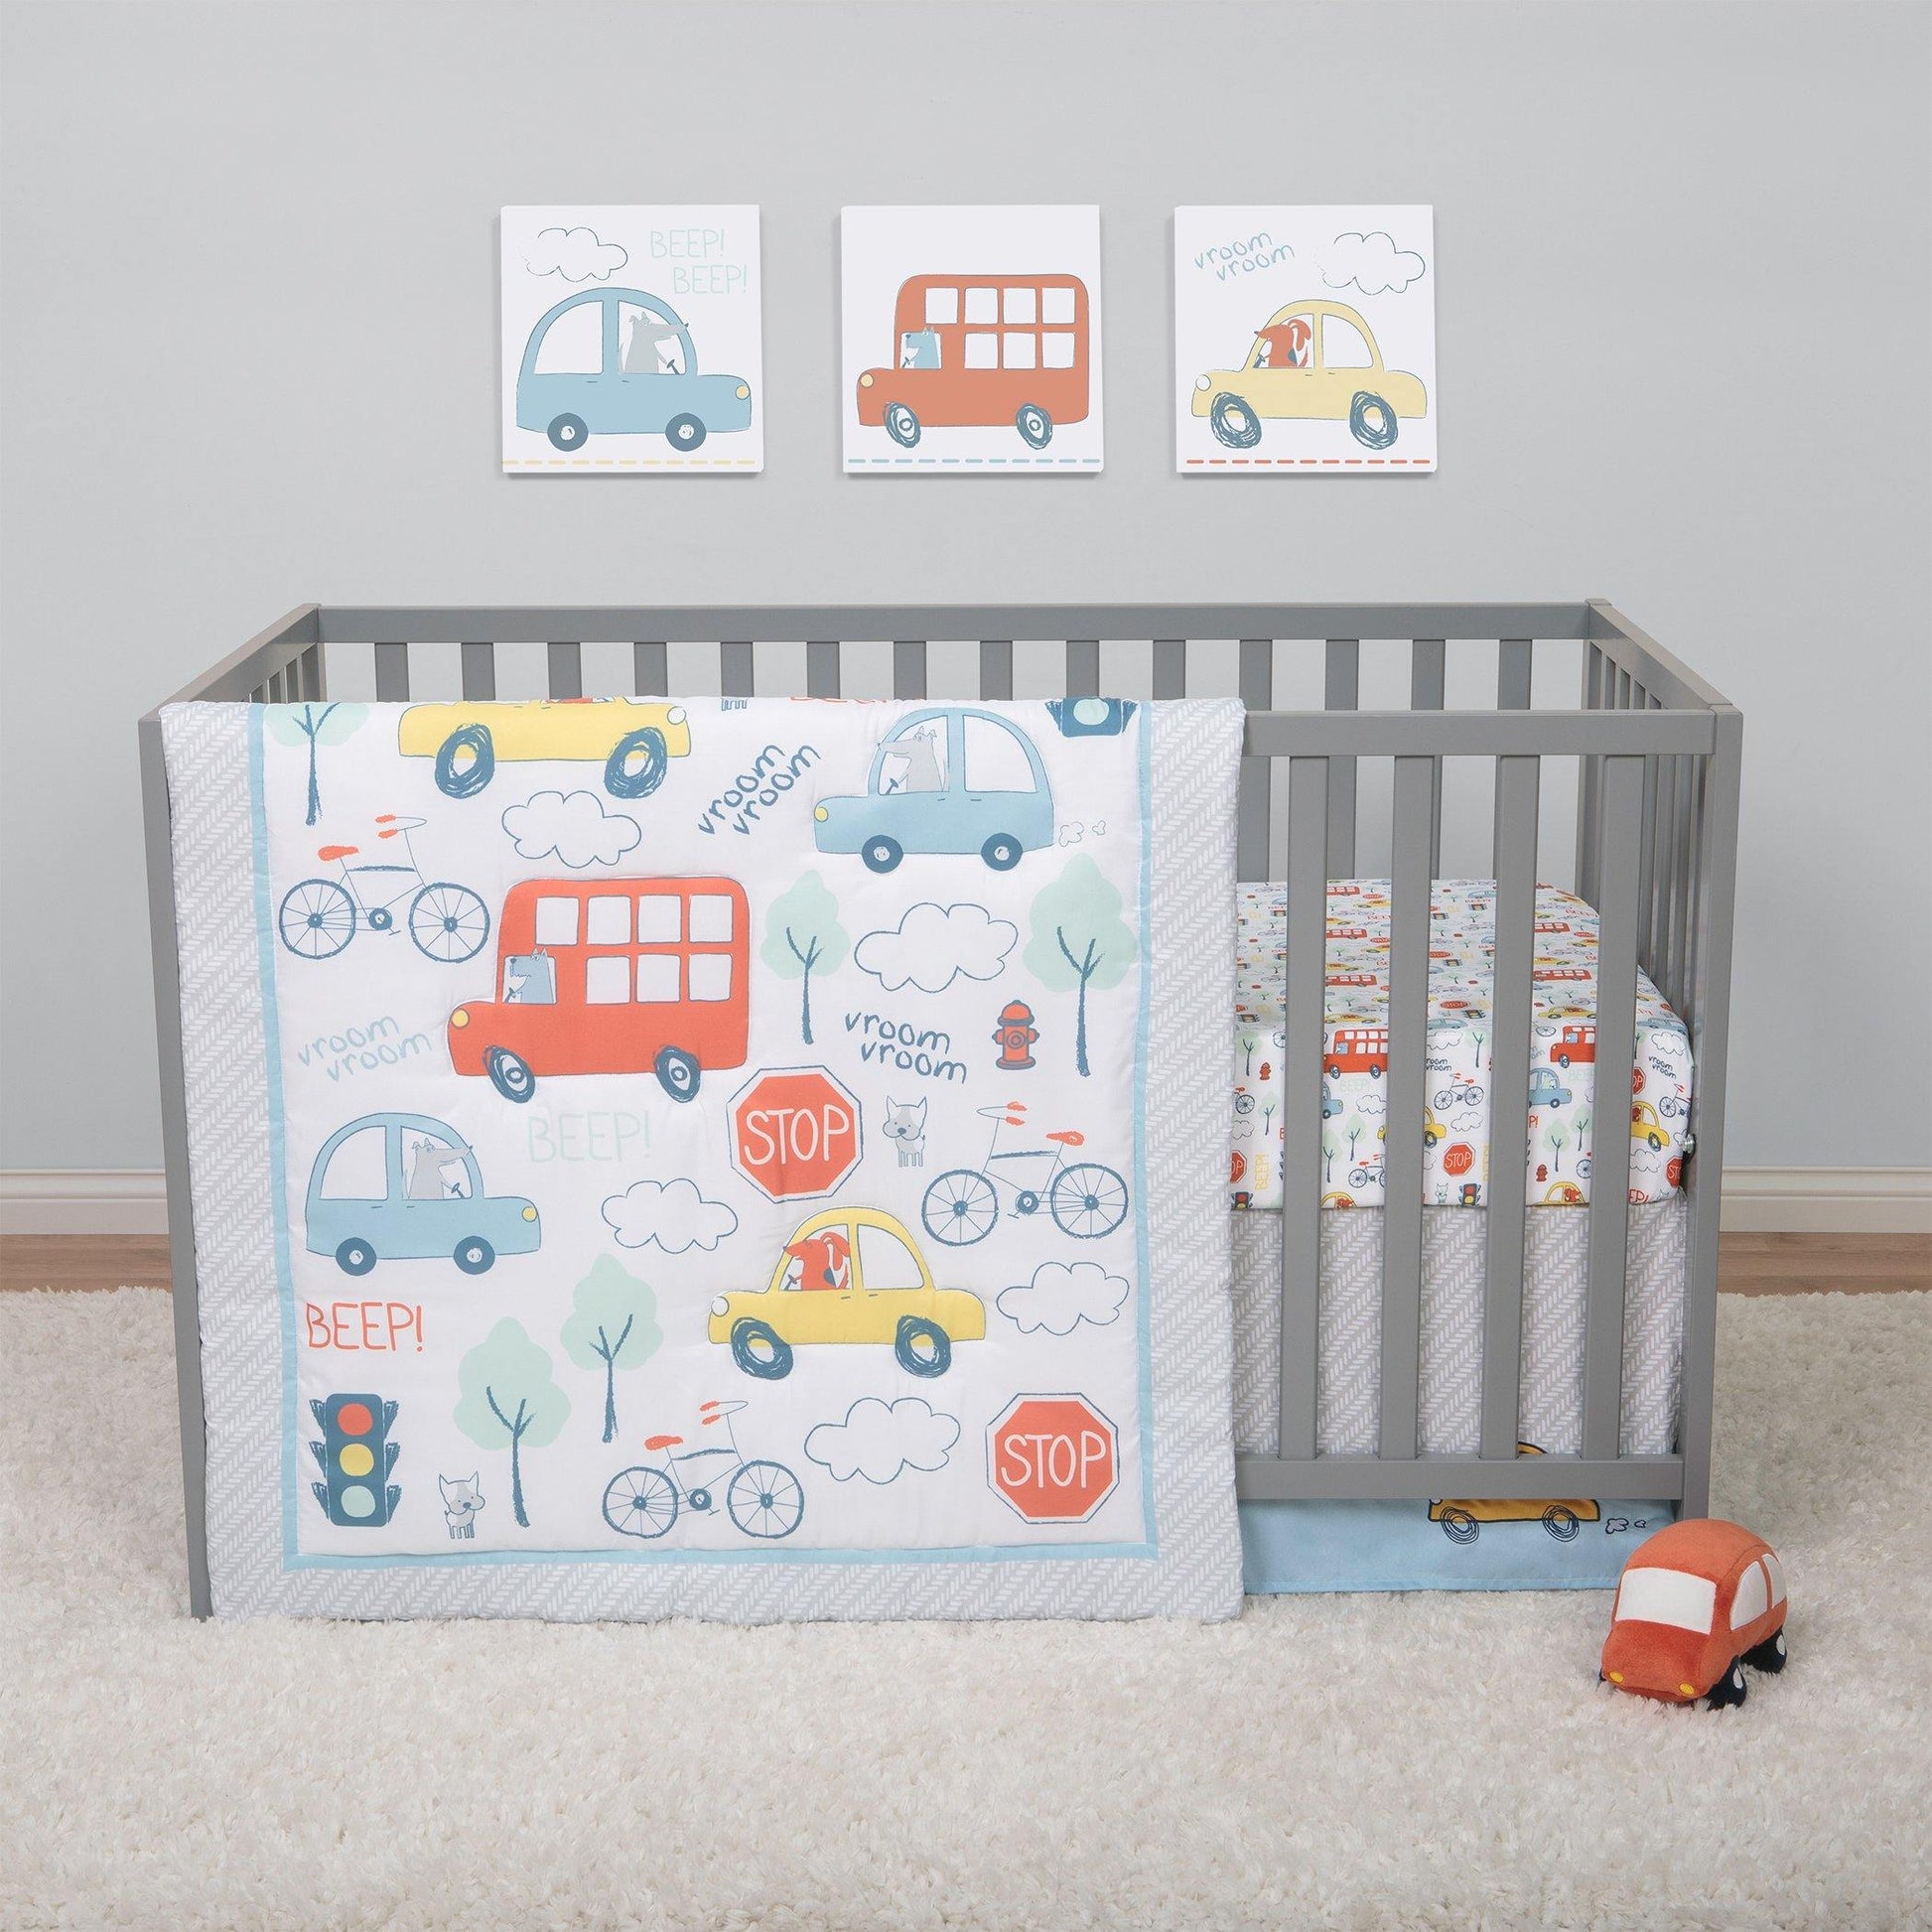 Beep Beep 4 Piece Bedding Set by Sammy and Lou- in a stylized bedroom